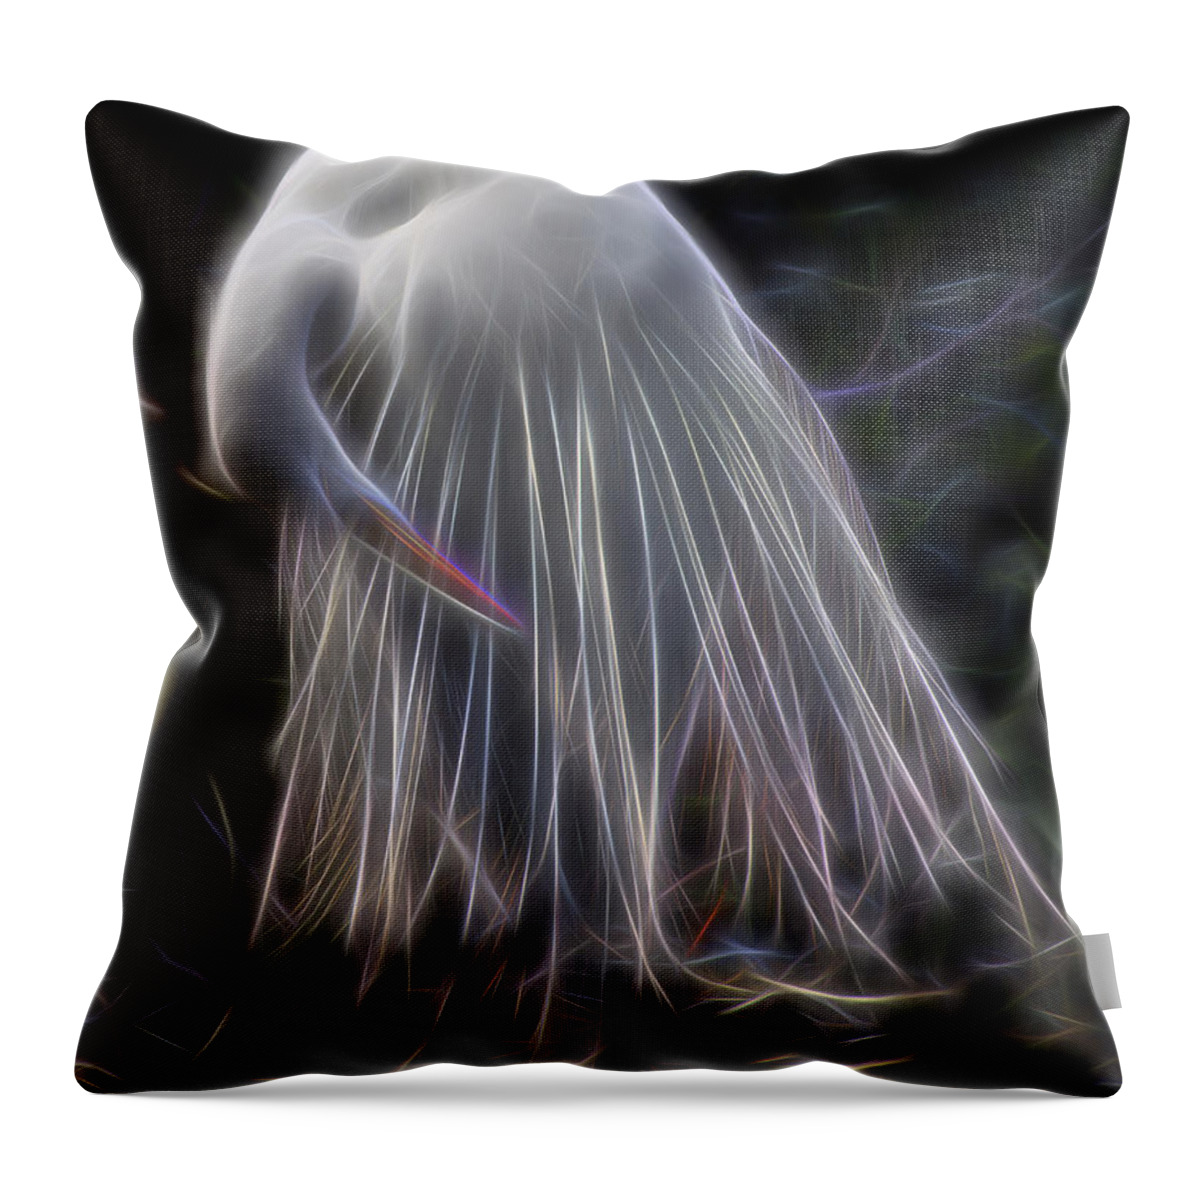 Nature Throw Pillow featuring the digital art Time Of Life by William Horden